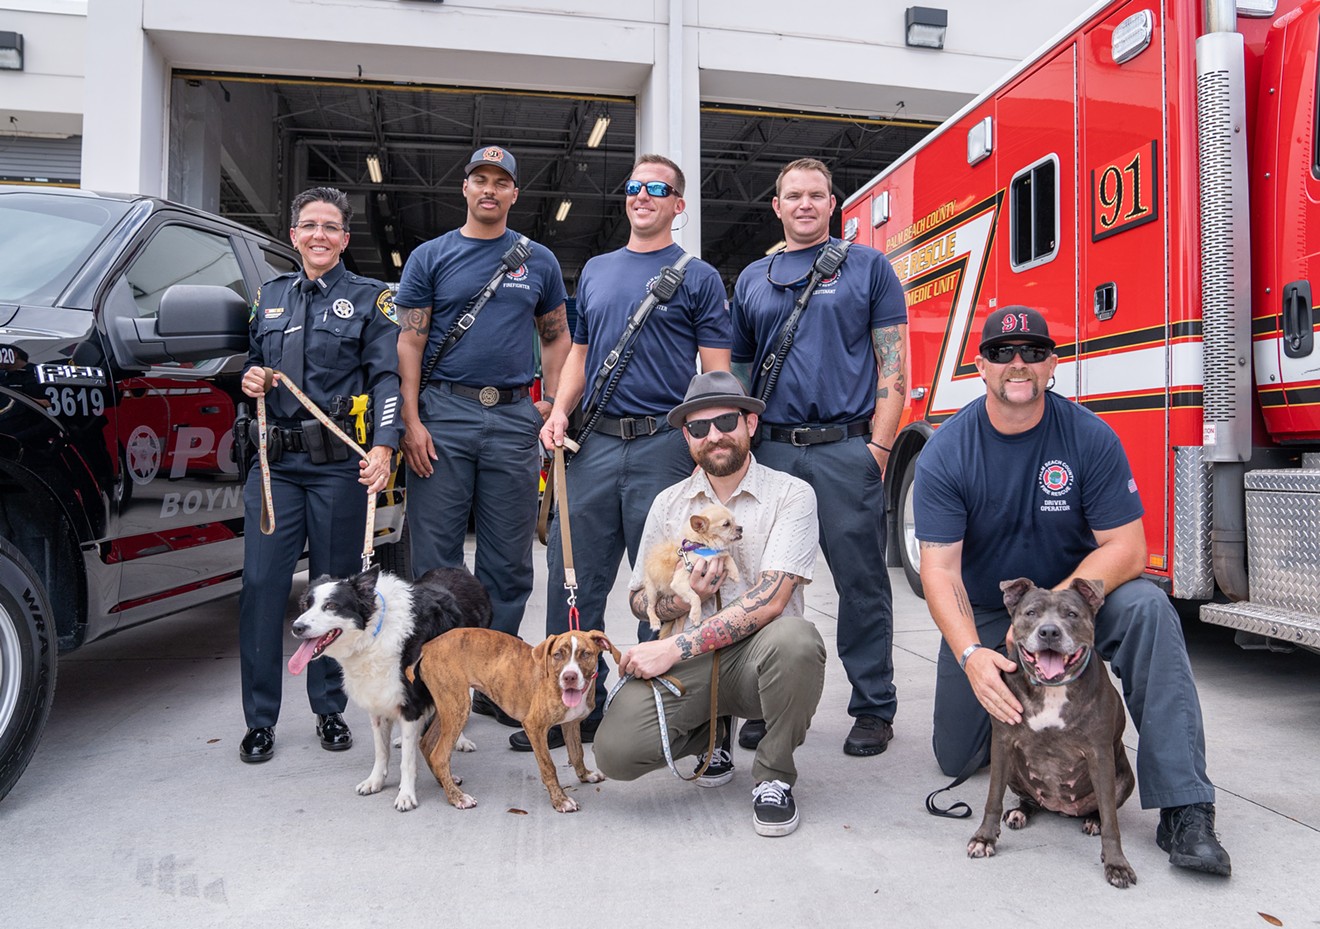 Mick Rude, holding dog, joins members of Boynton Beach Police Department and Palm Beach County Fire Rescue.